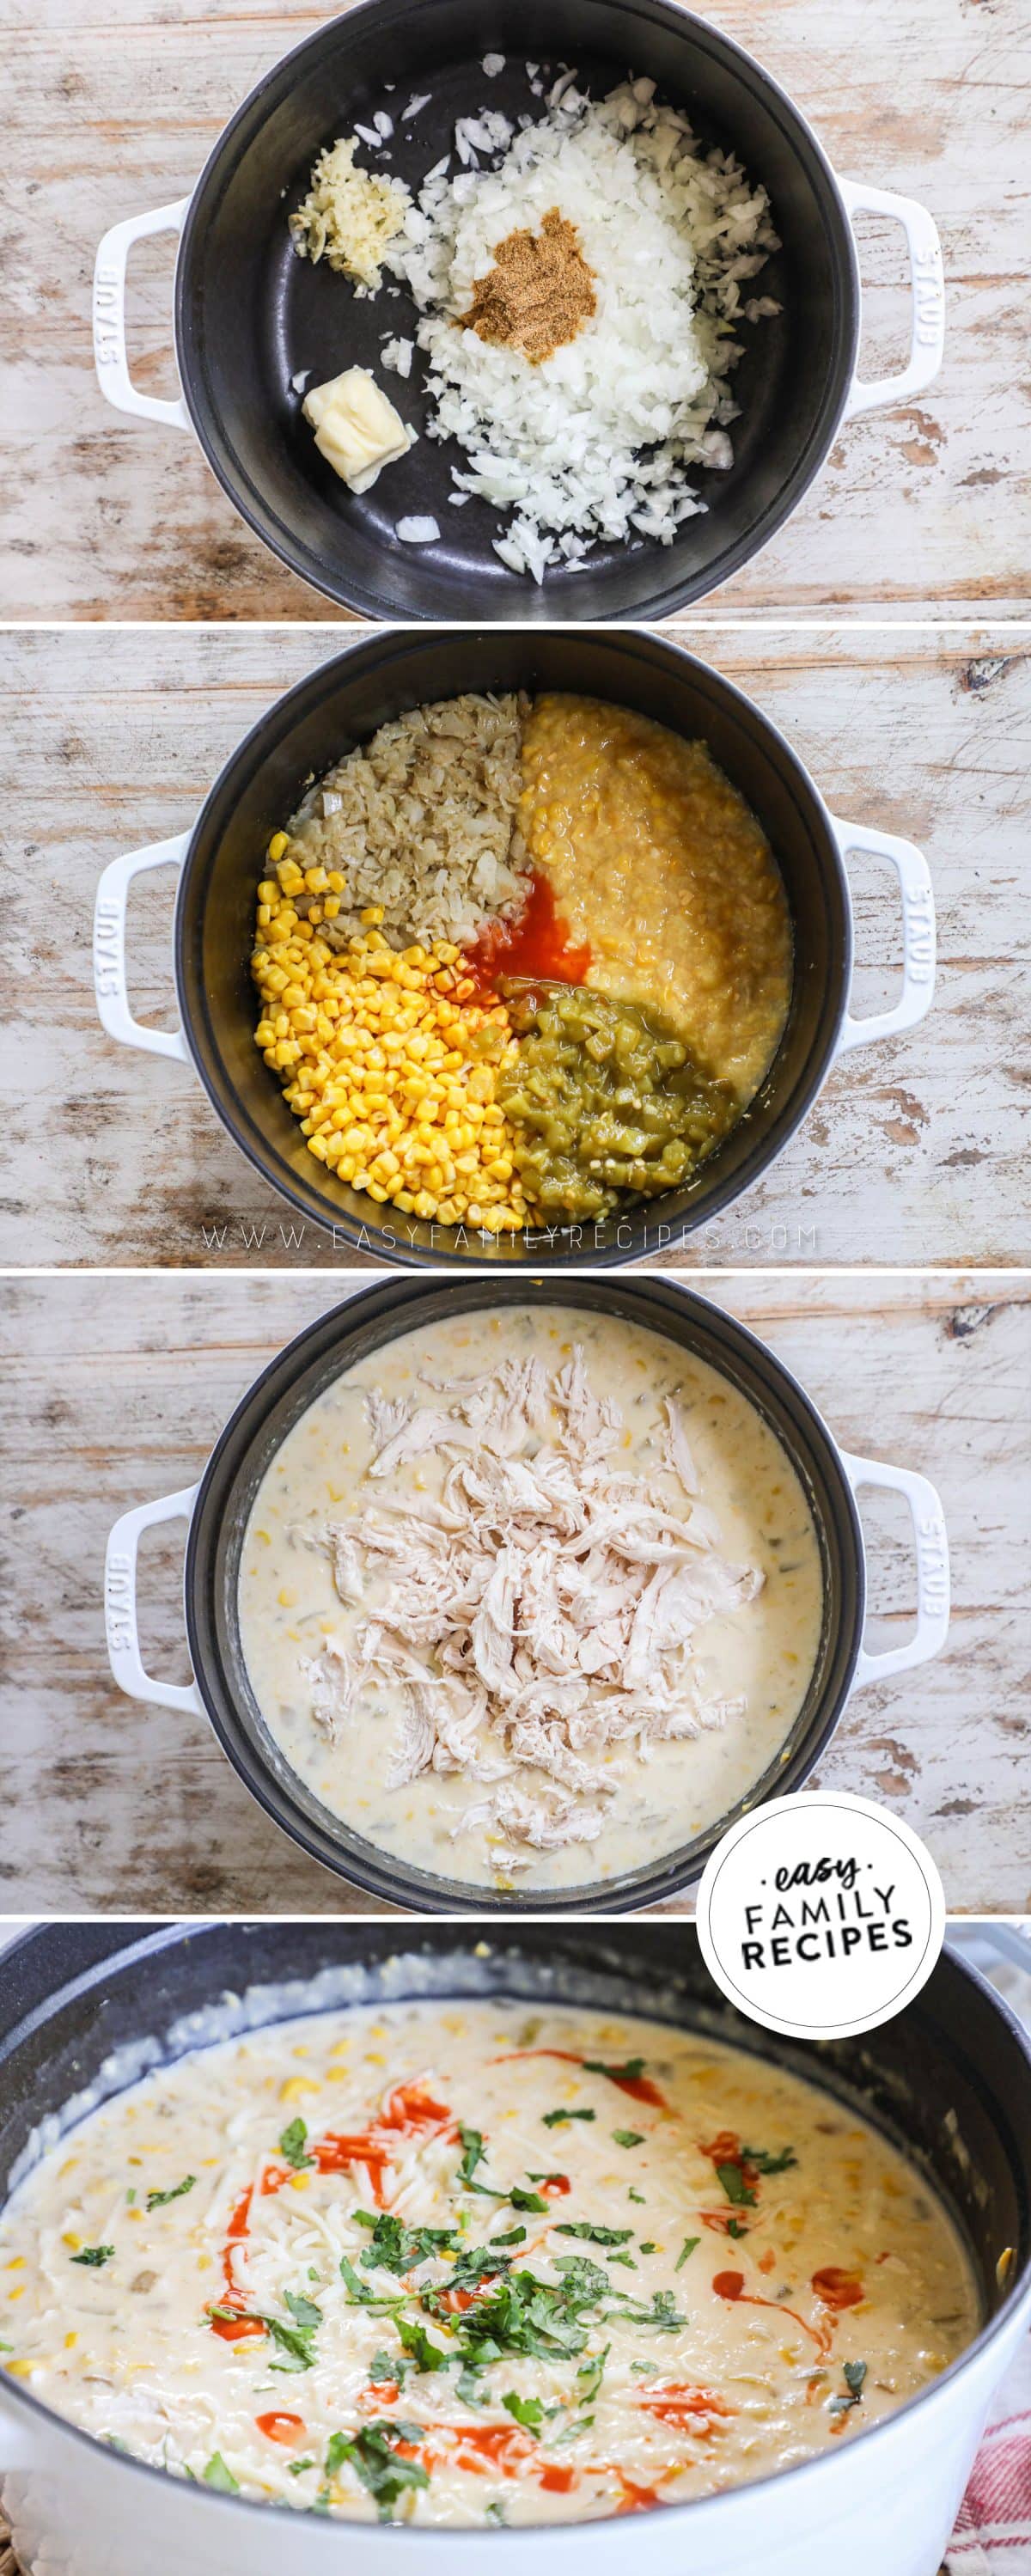 process photos for how to make green chili chicken corn chowder 1. sauté onion and garlic in butter, 2. add corn, cheese, green chiles, and hot sauce, 3. add chicken, half-and-half, and broth, 4. garnish and serve